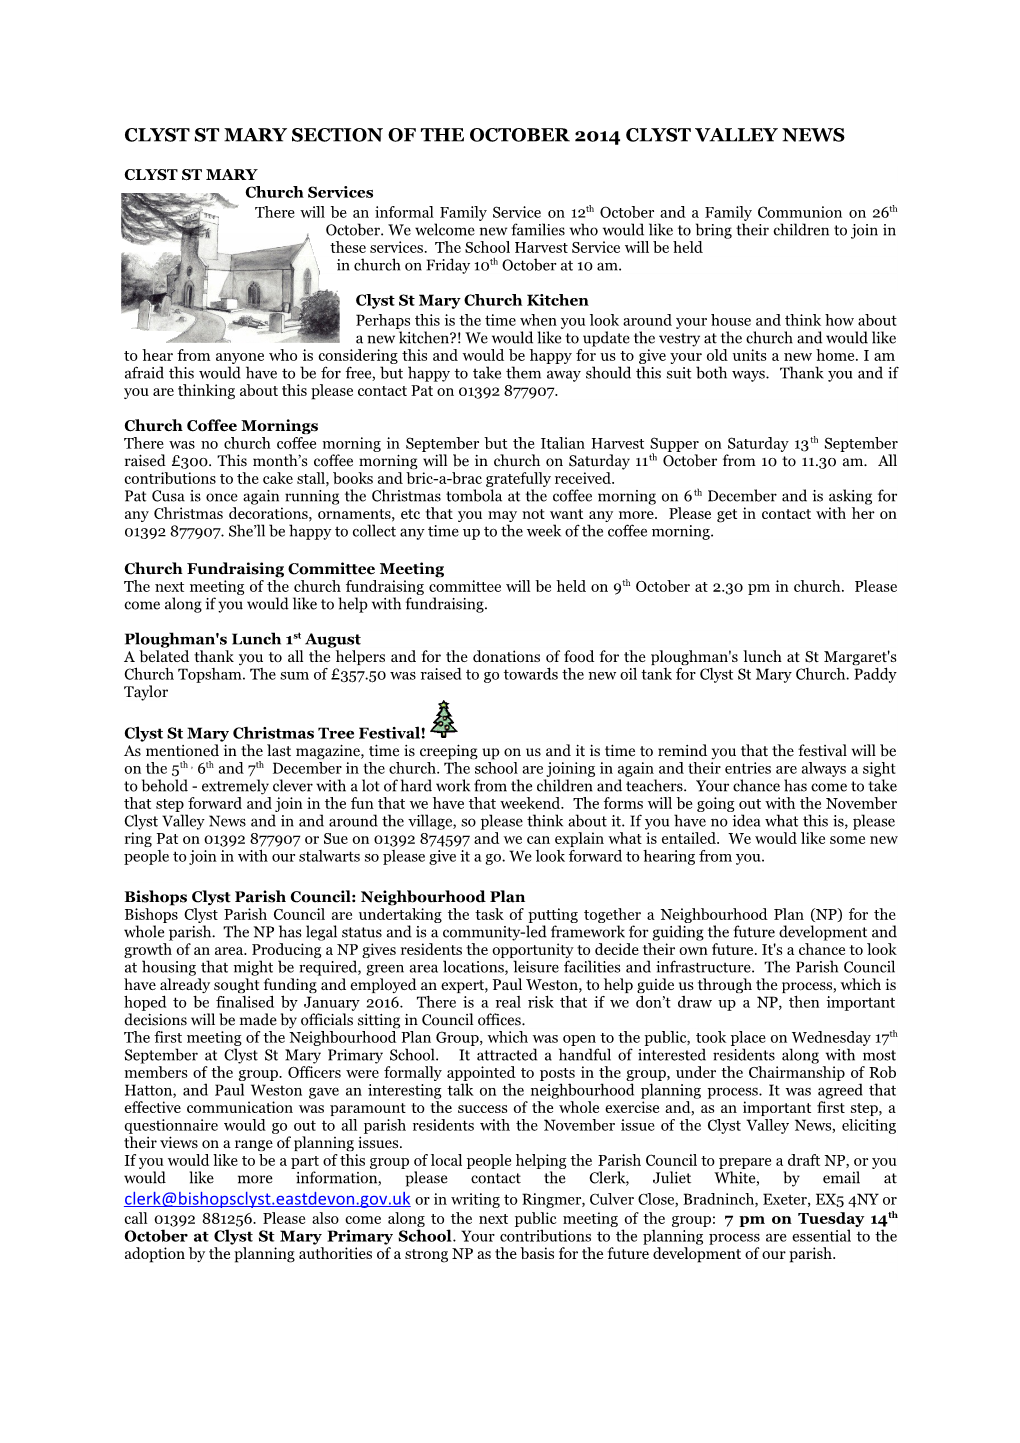 Clyst St Mary Section of the October 2014 Clyst Valley News